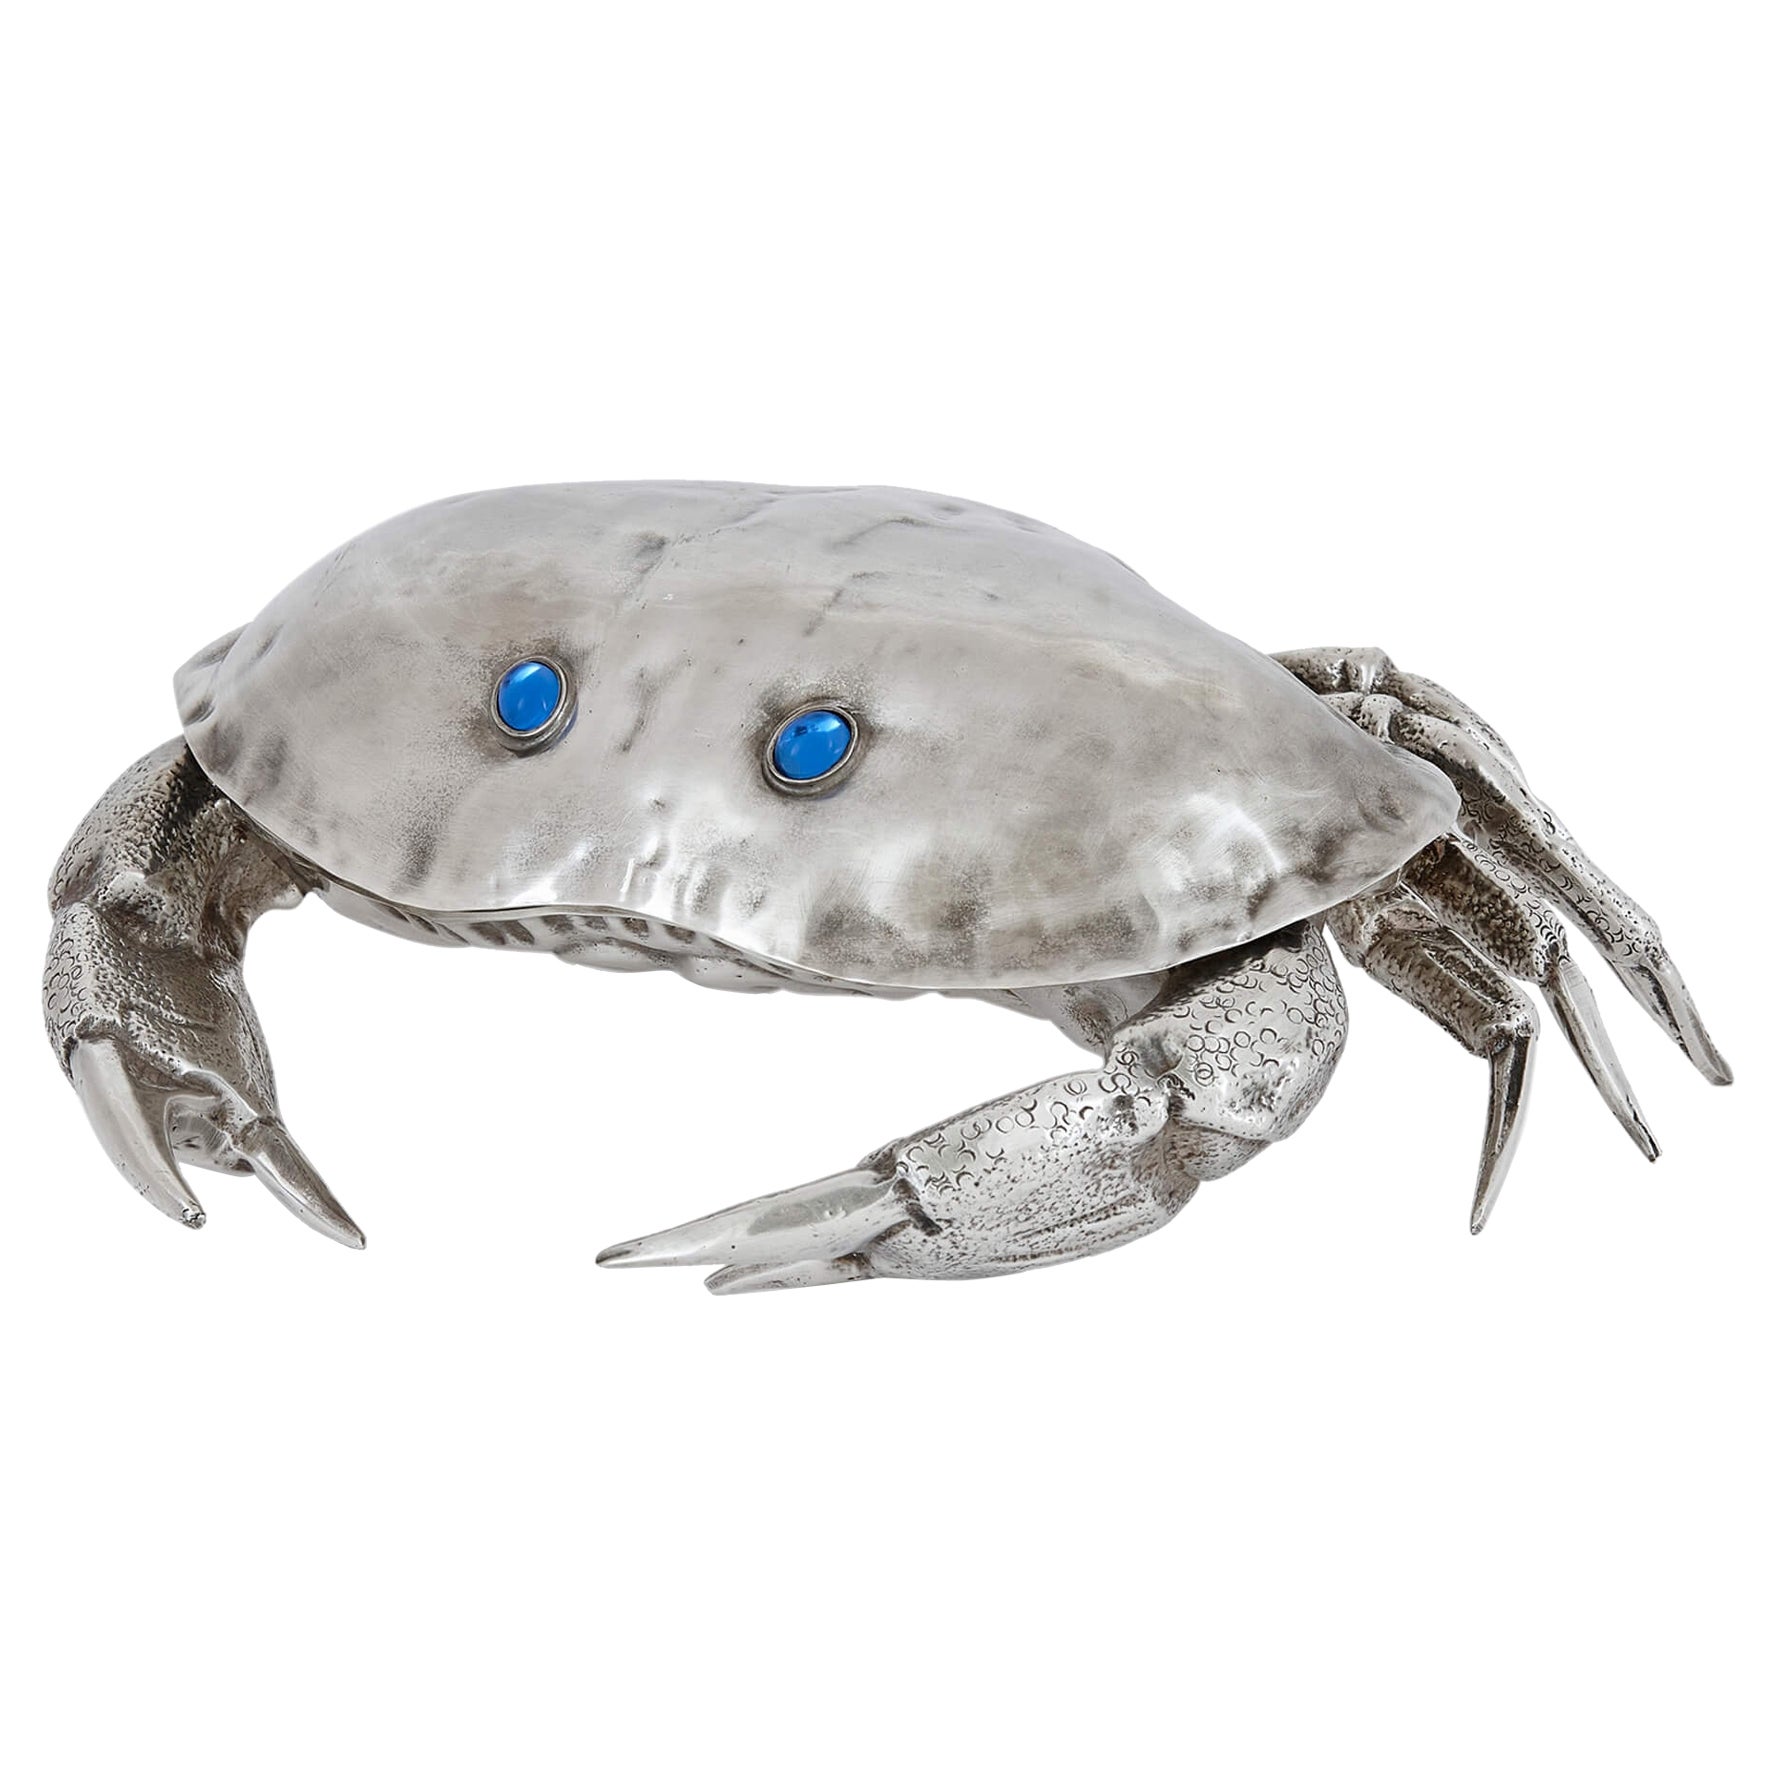 Italian Silver-Plated Crab-Form Caviar Dish Attributed to Franco Lapini For Sale